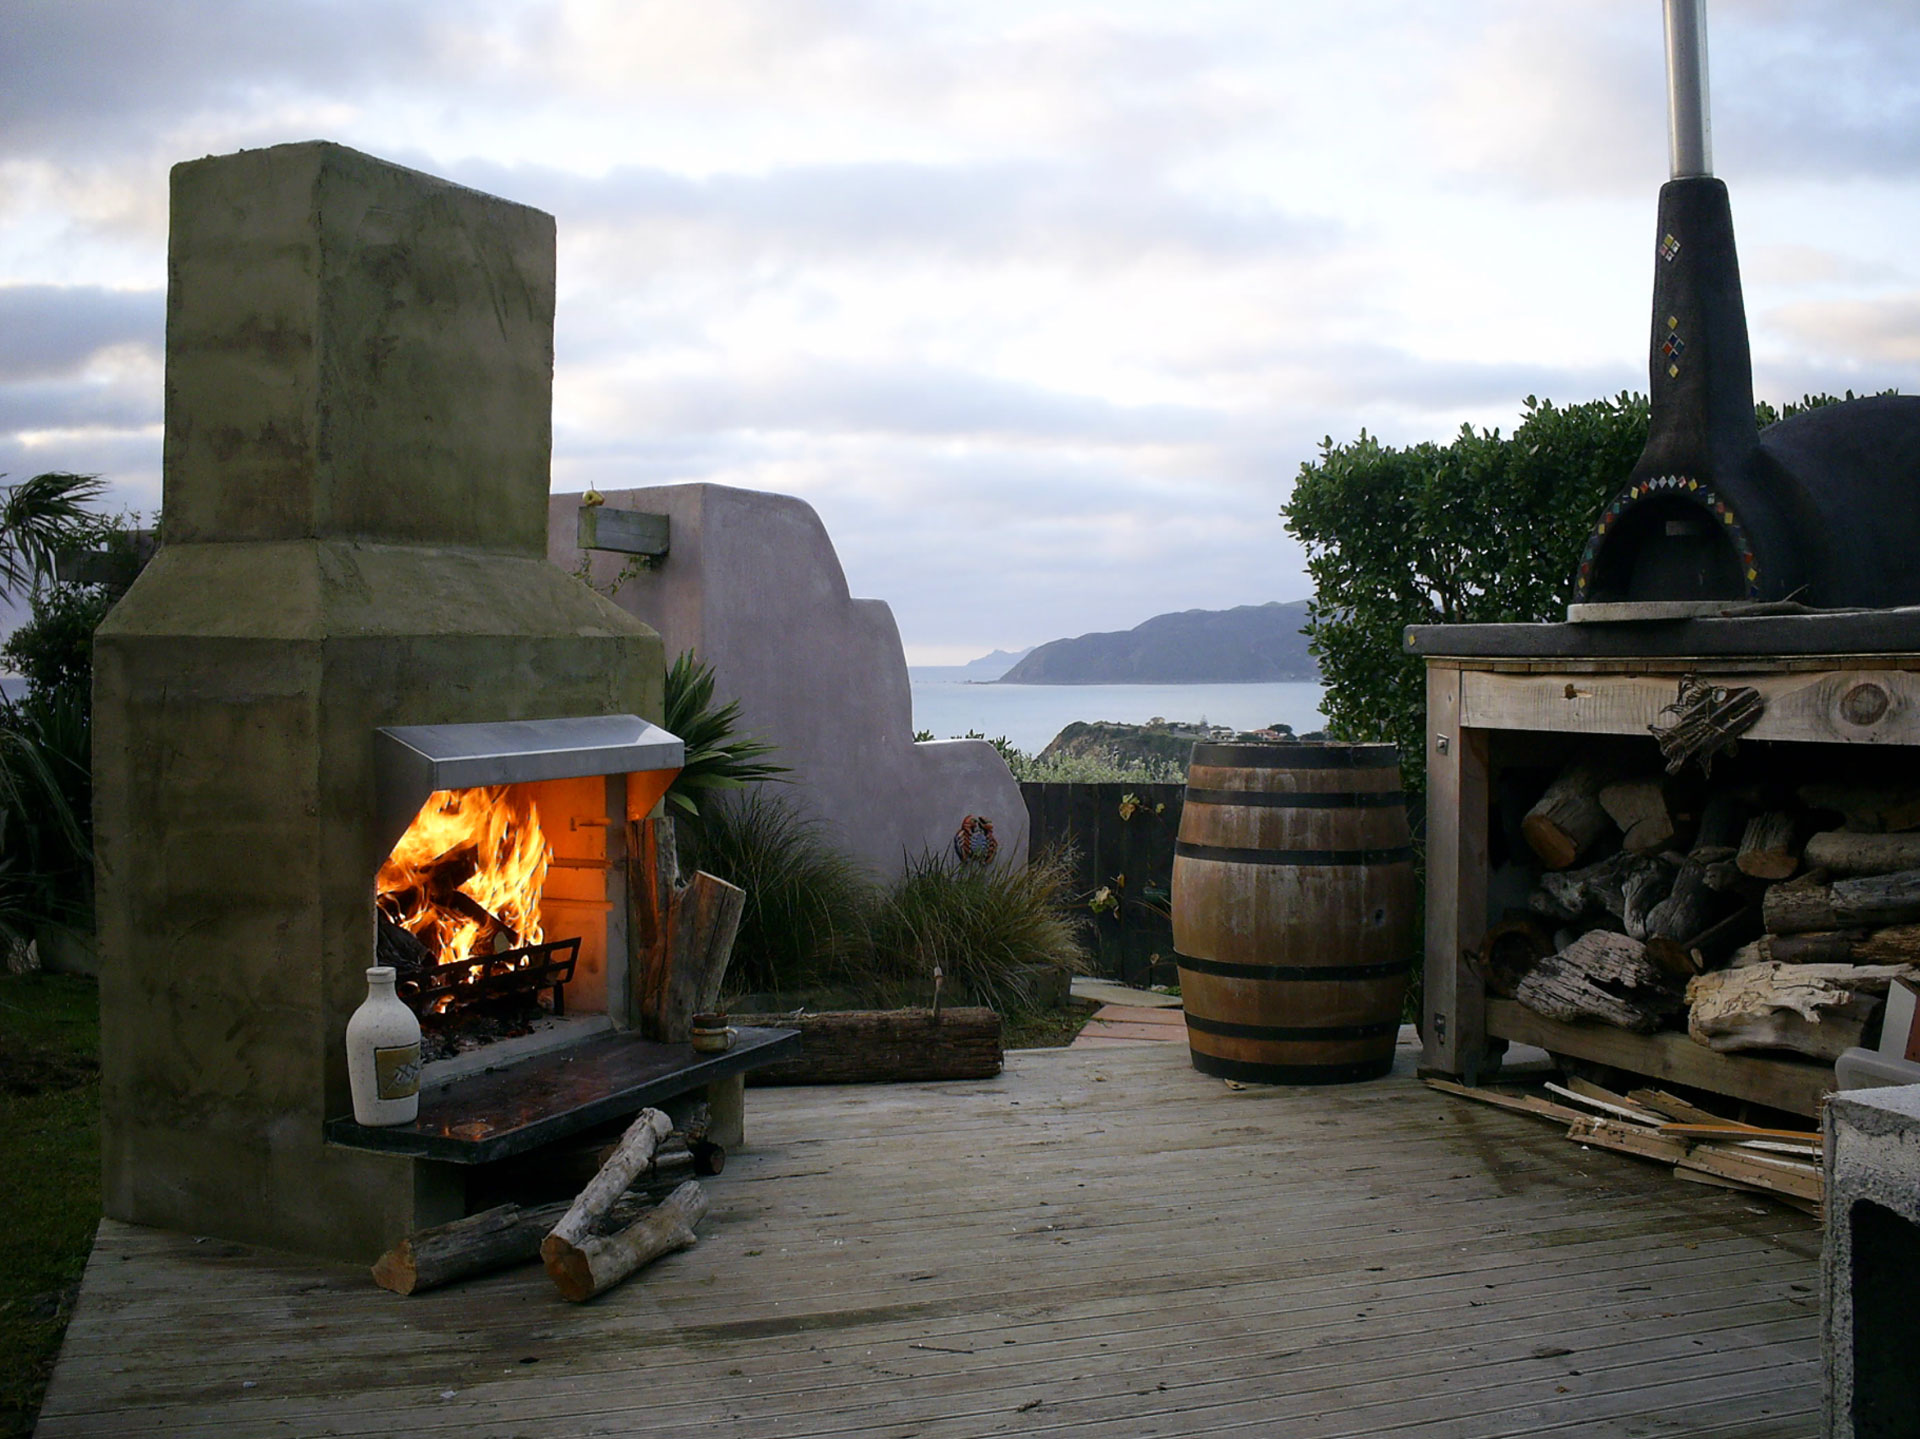 Outdoor Fireplaces & Kitset Pizza Ovens NZ Loves To Share